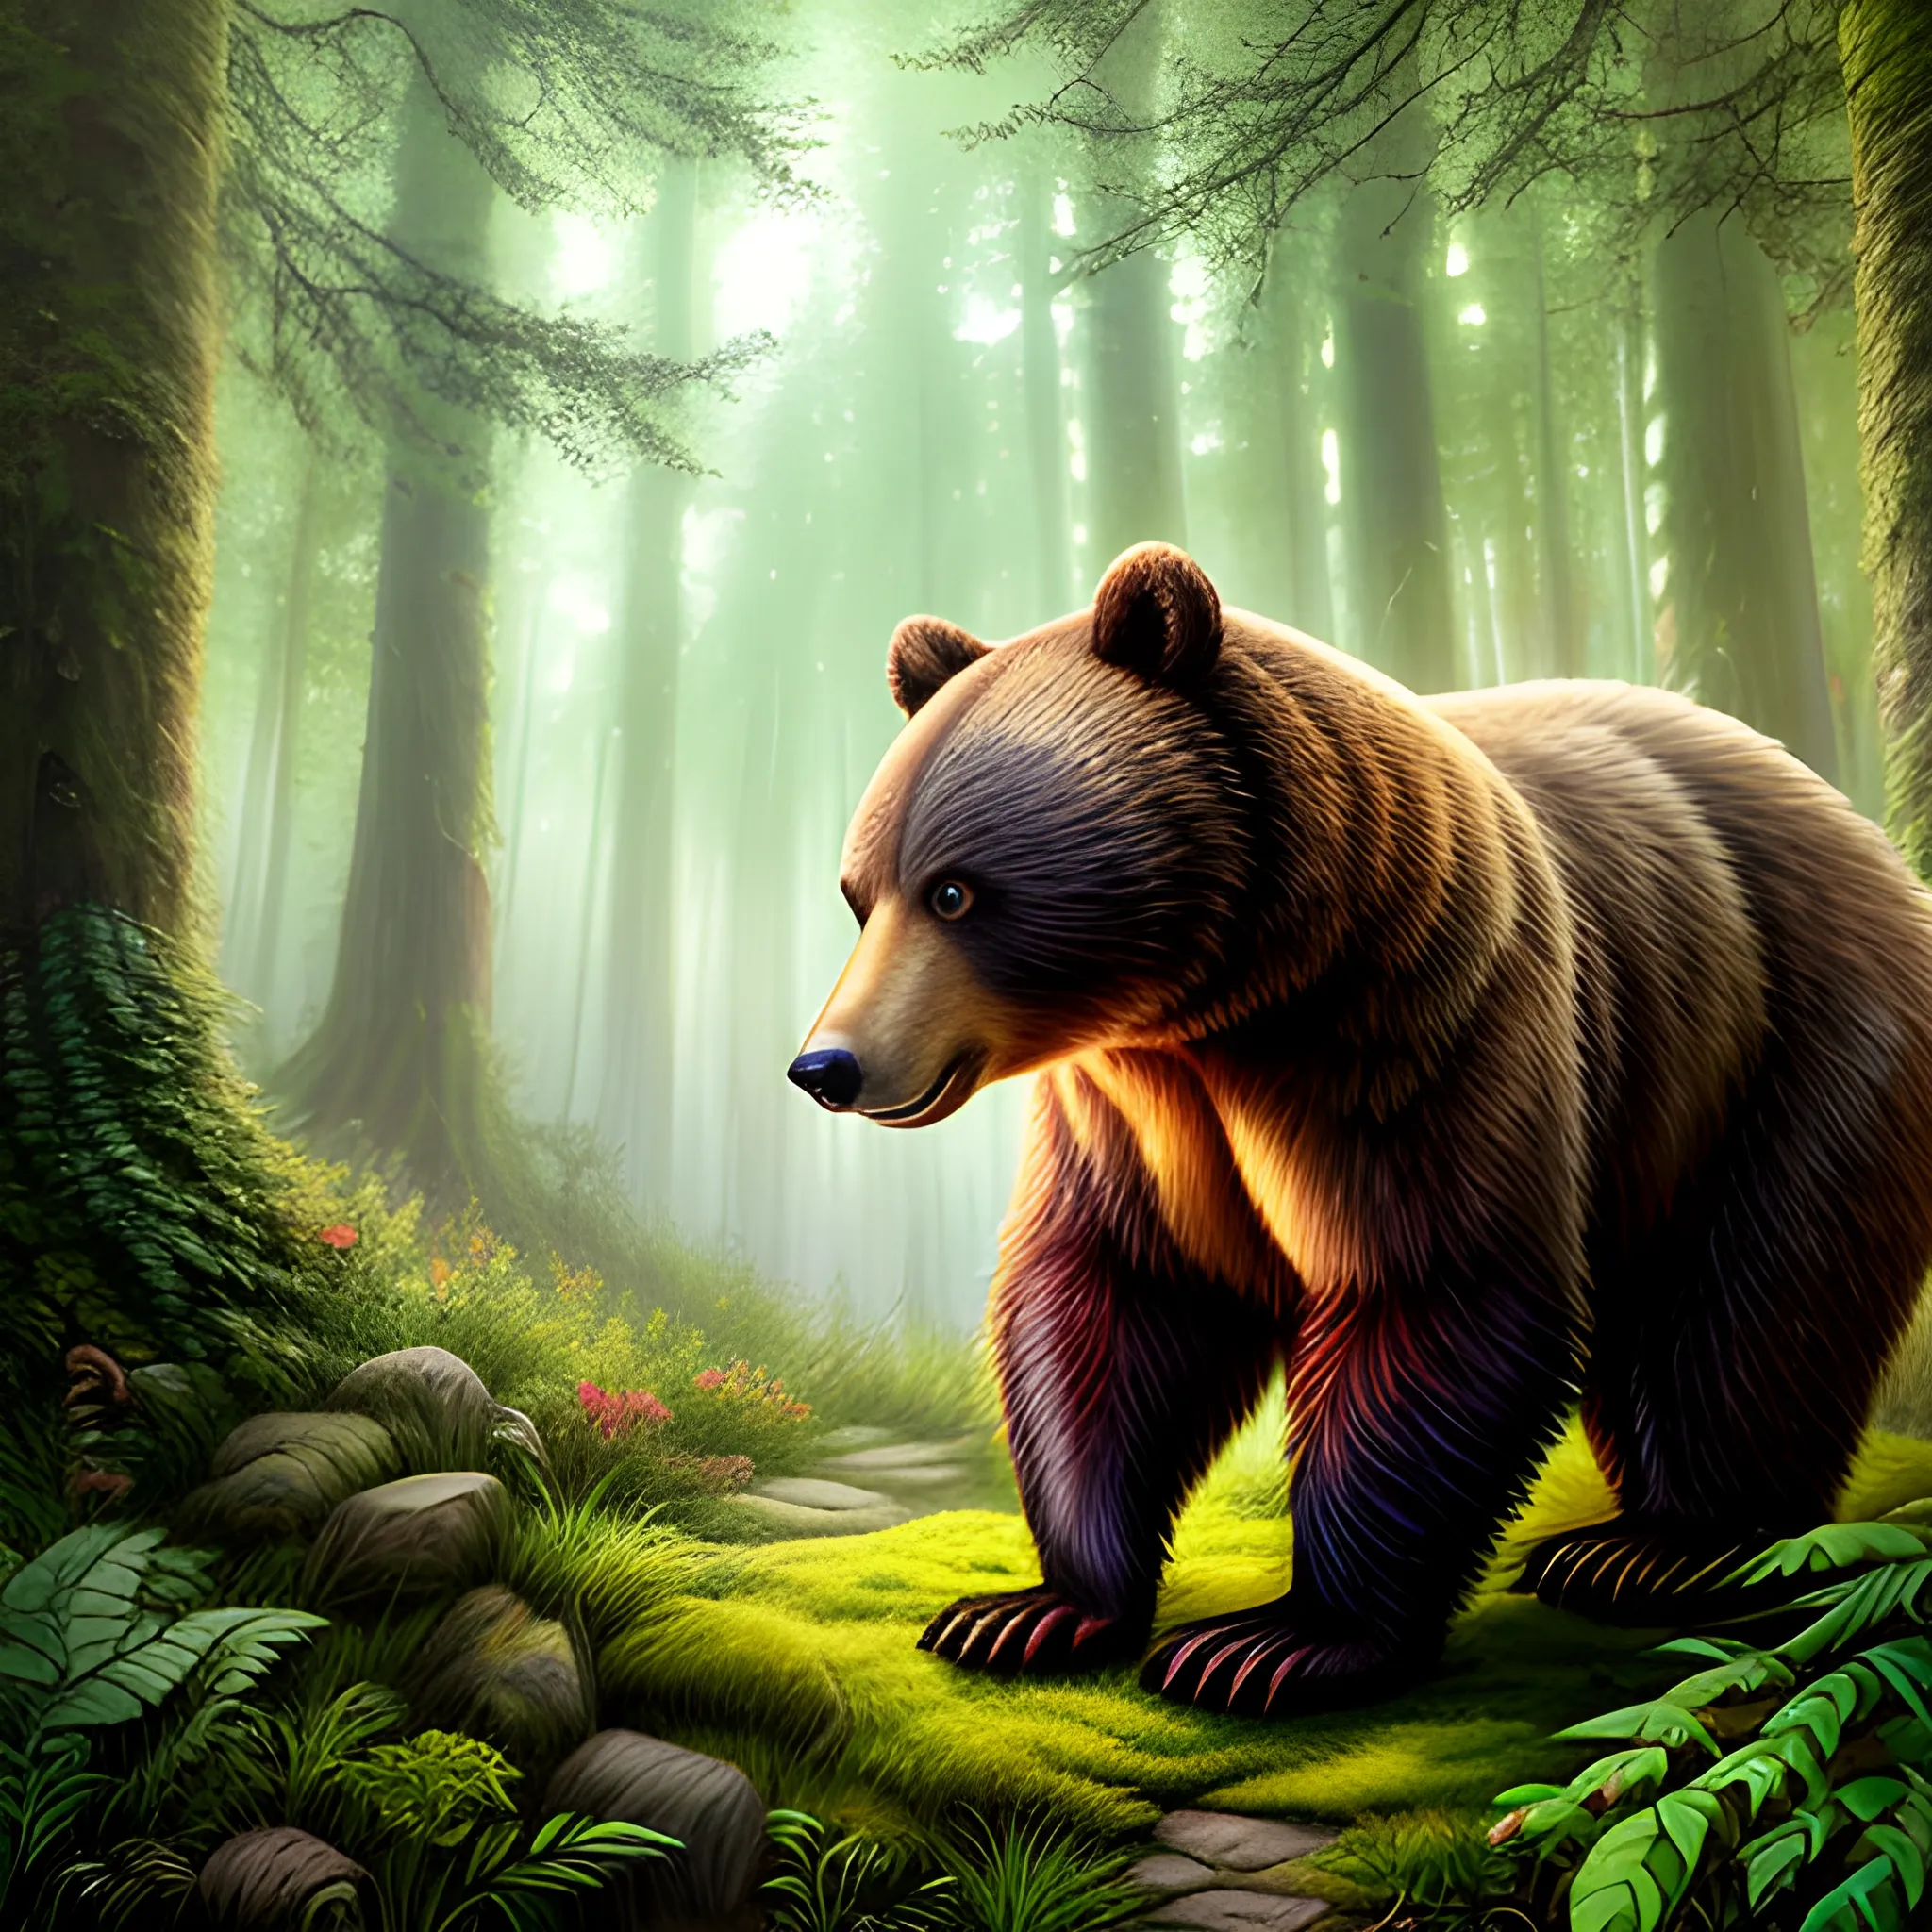 A photorealistic illustration depicting a baby bear in a magical enchanted forest. The illustration showcases the bear's adorable and innocent appearance, surrounded by vibrant and enchanting elements of the magical forest. The lighting in the scene adds a sense of wonder and mystery, with rays of sunlight filtering through the canopy of trees. The foliage and flora in the forest are depicted with rich colors and intricate details, creating a visually captivating environment. The illustration captures the emotions of the baby bear, evoking a sense of curiosity, vulnerability, and the desire to find its way back home., Cartoon